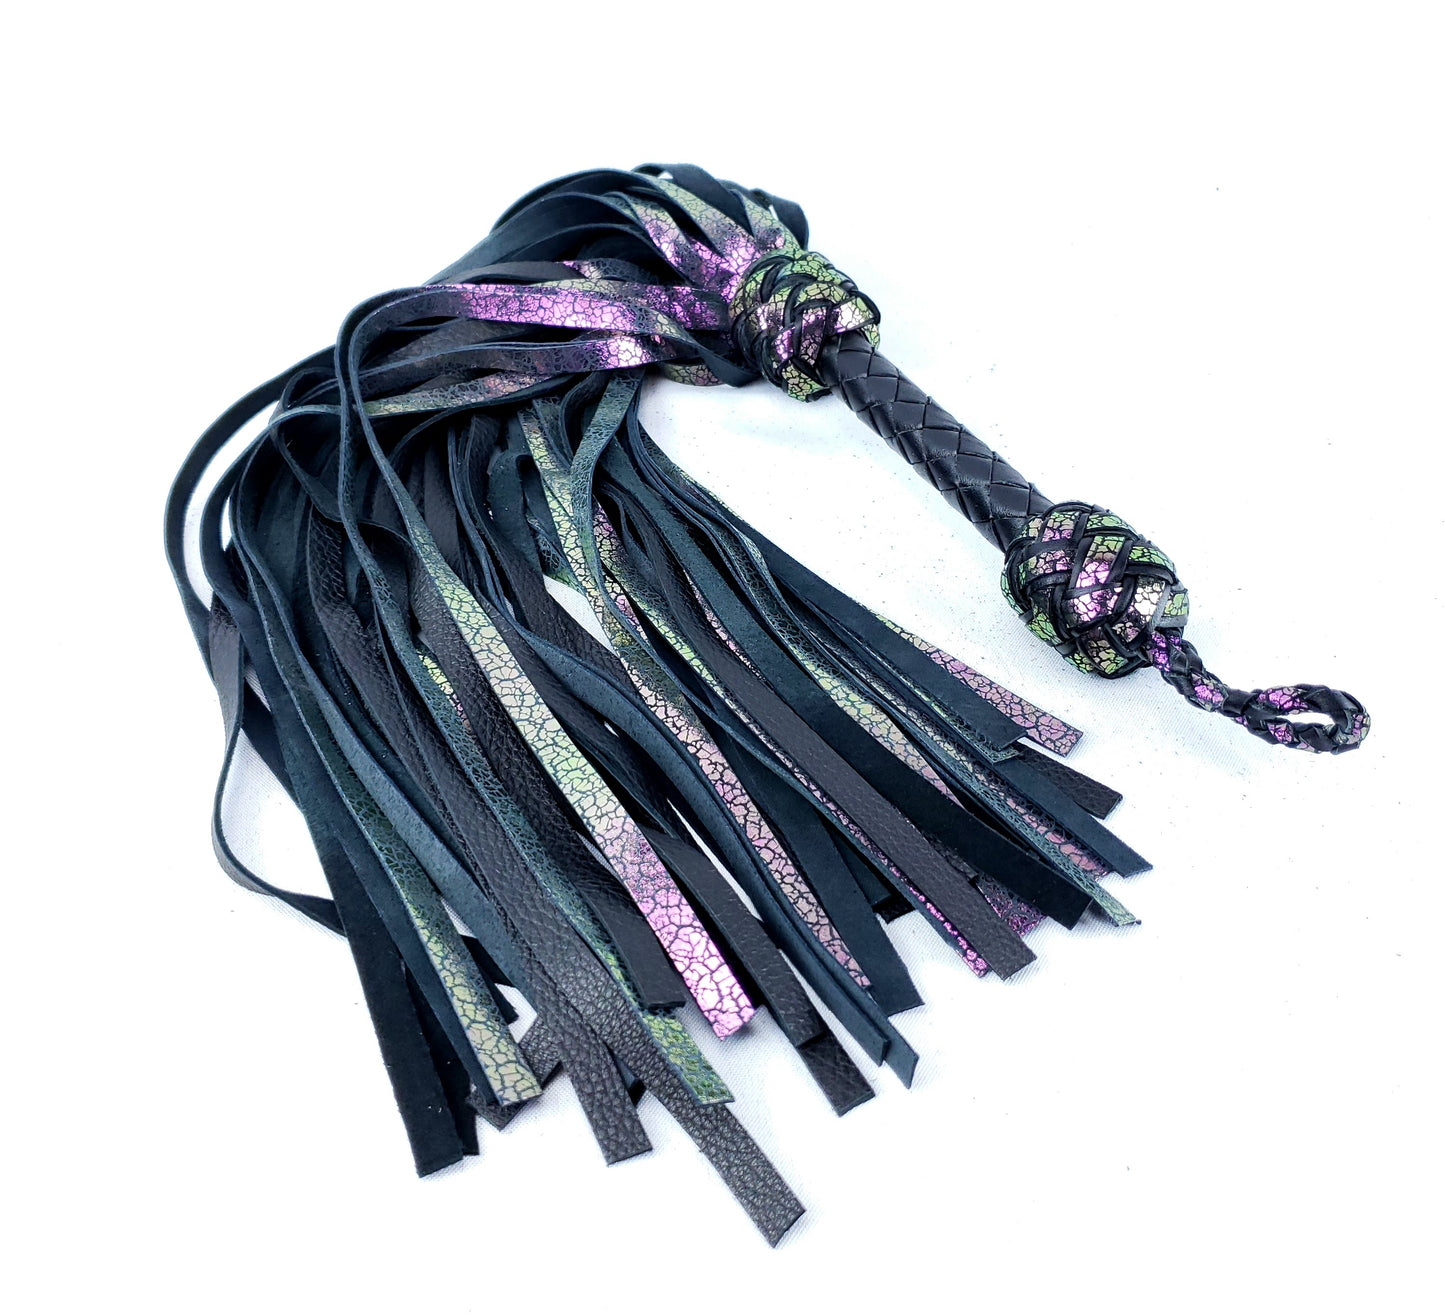 Chameleon Leather Floggers- Made to Order